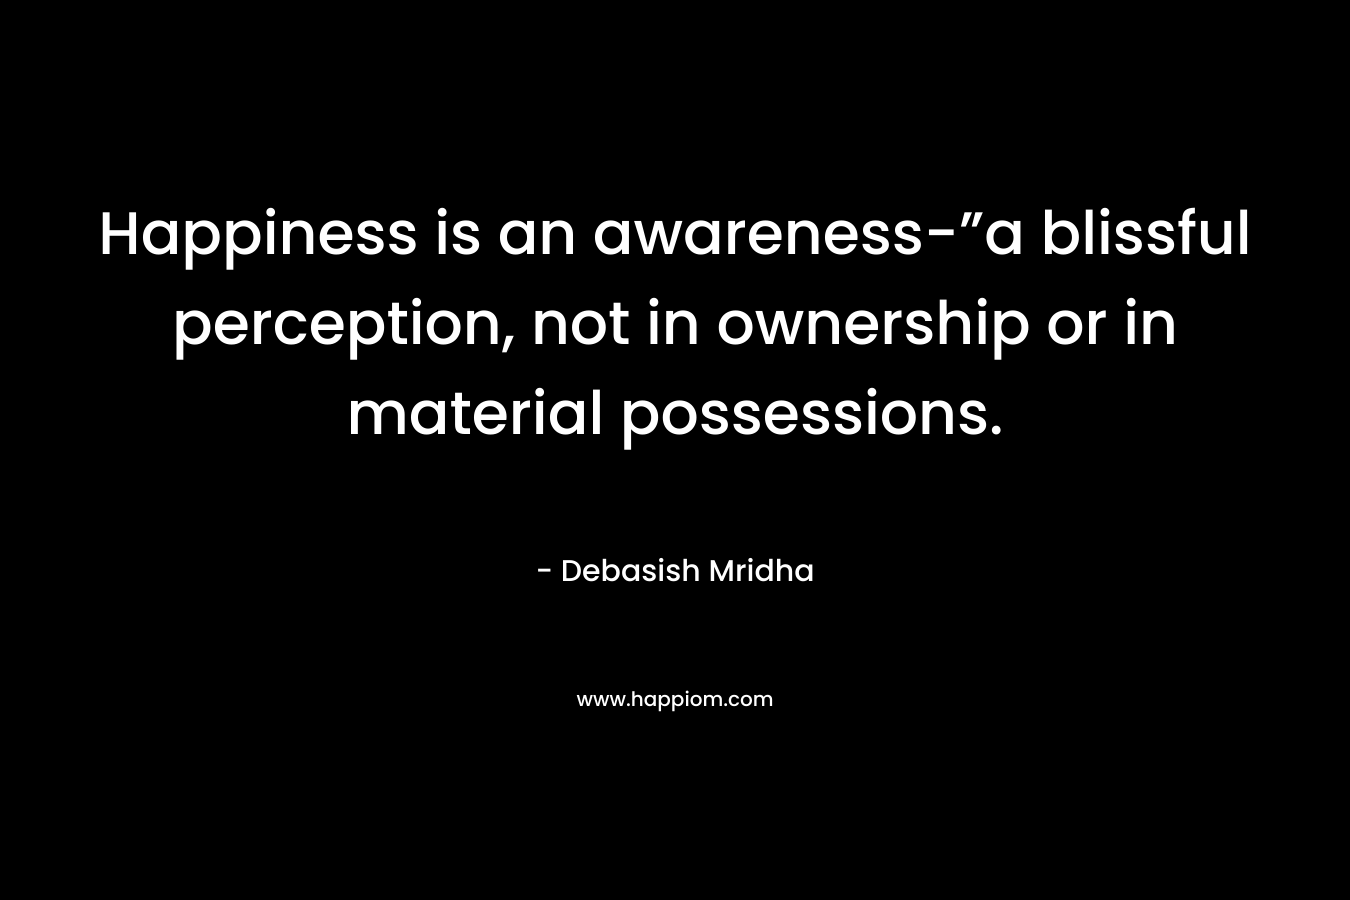 Happiness is an awareness-”a blissful perception, not in ownership or in material possessions.